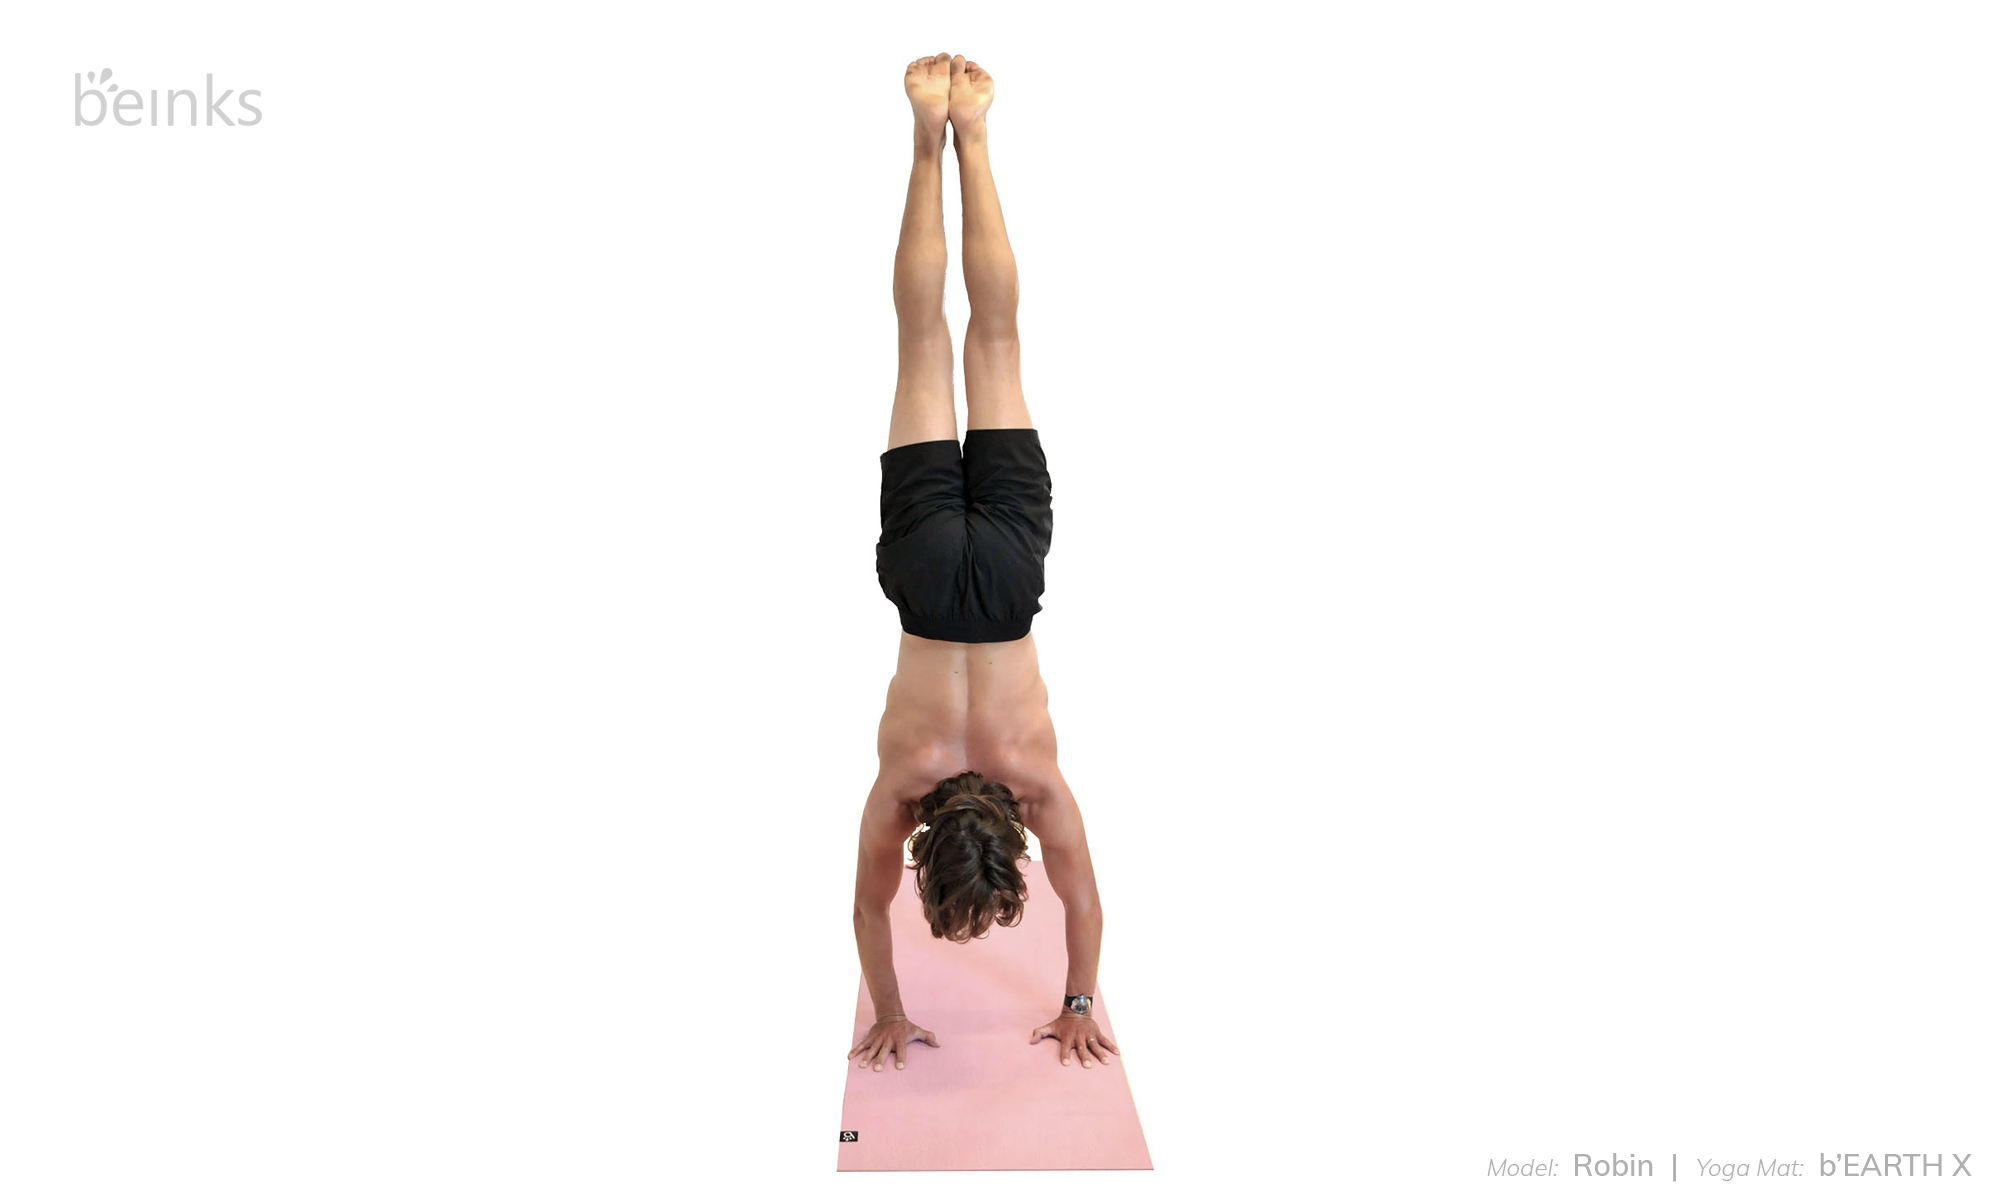 Yoga Poses to Get Strong For Headstand | POPSUGAR Fitness UK